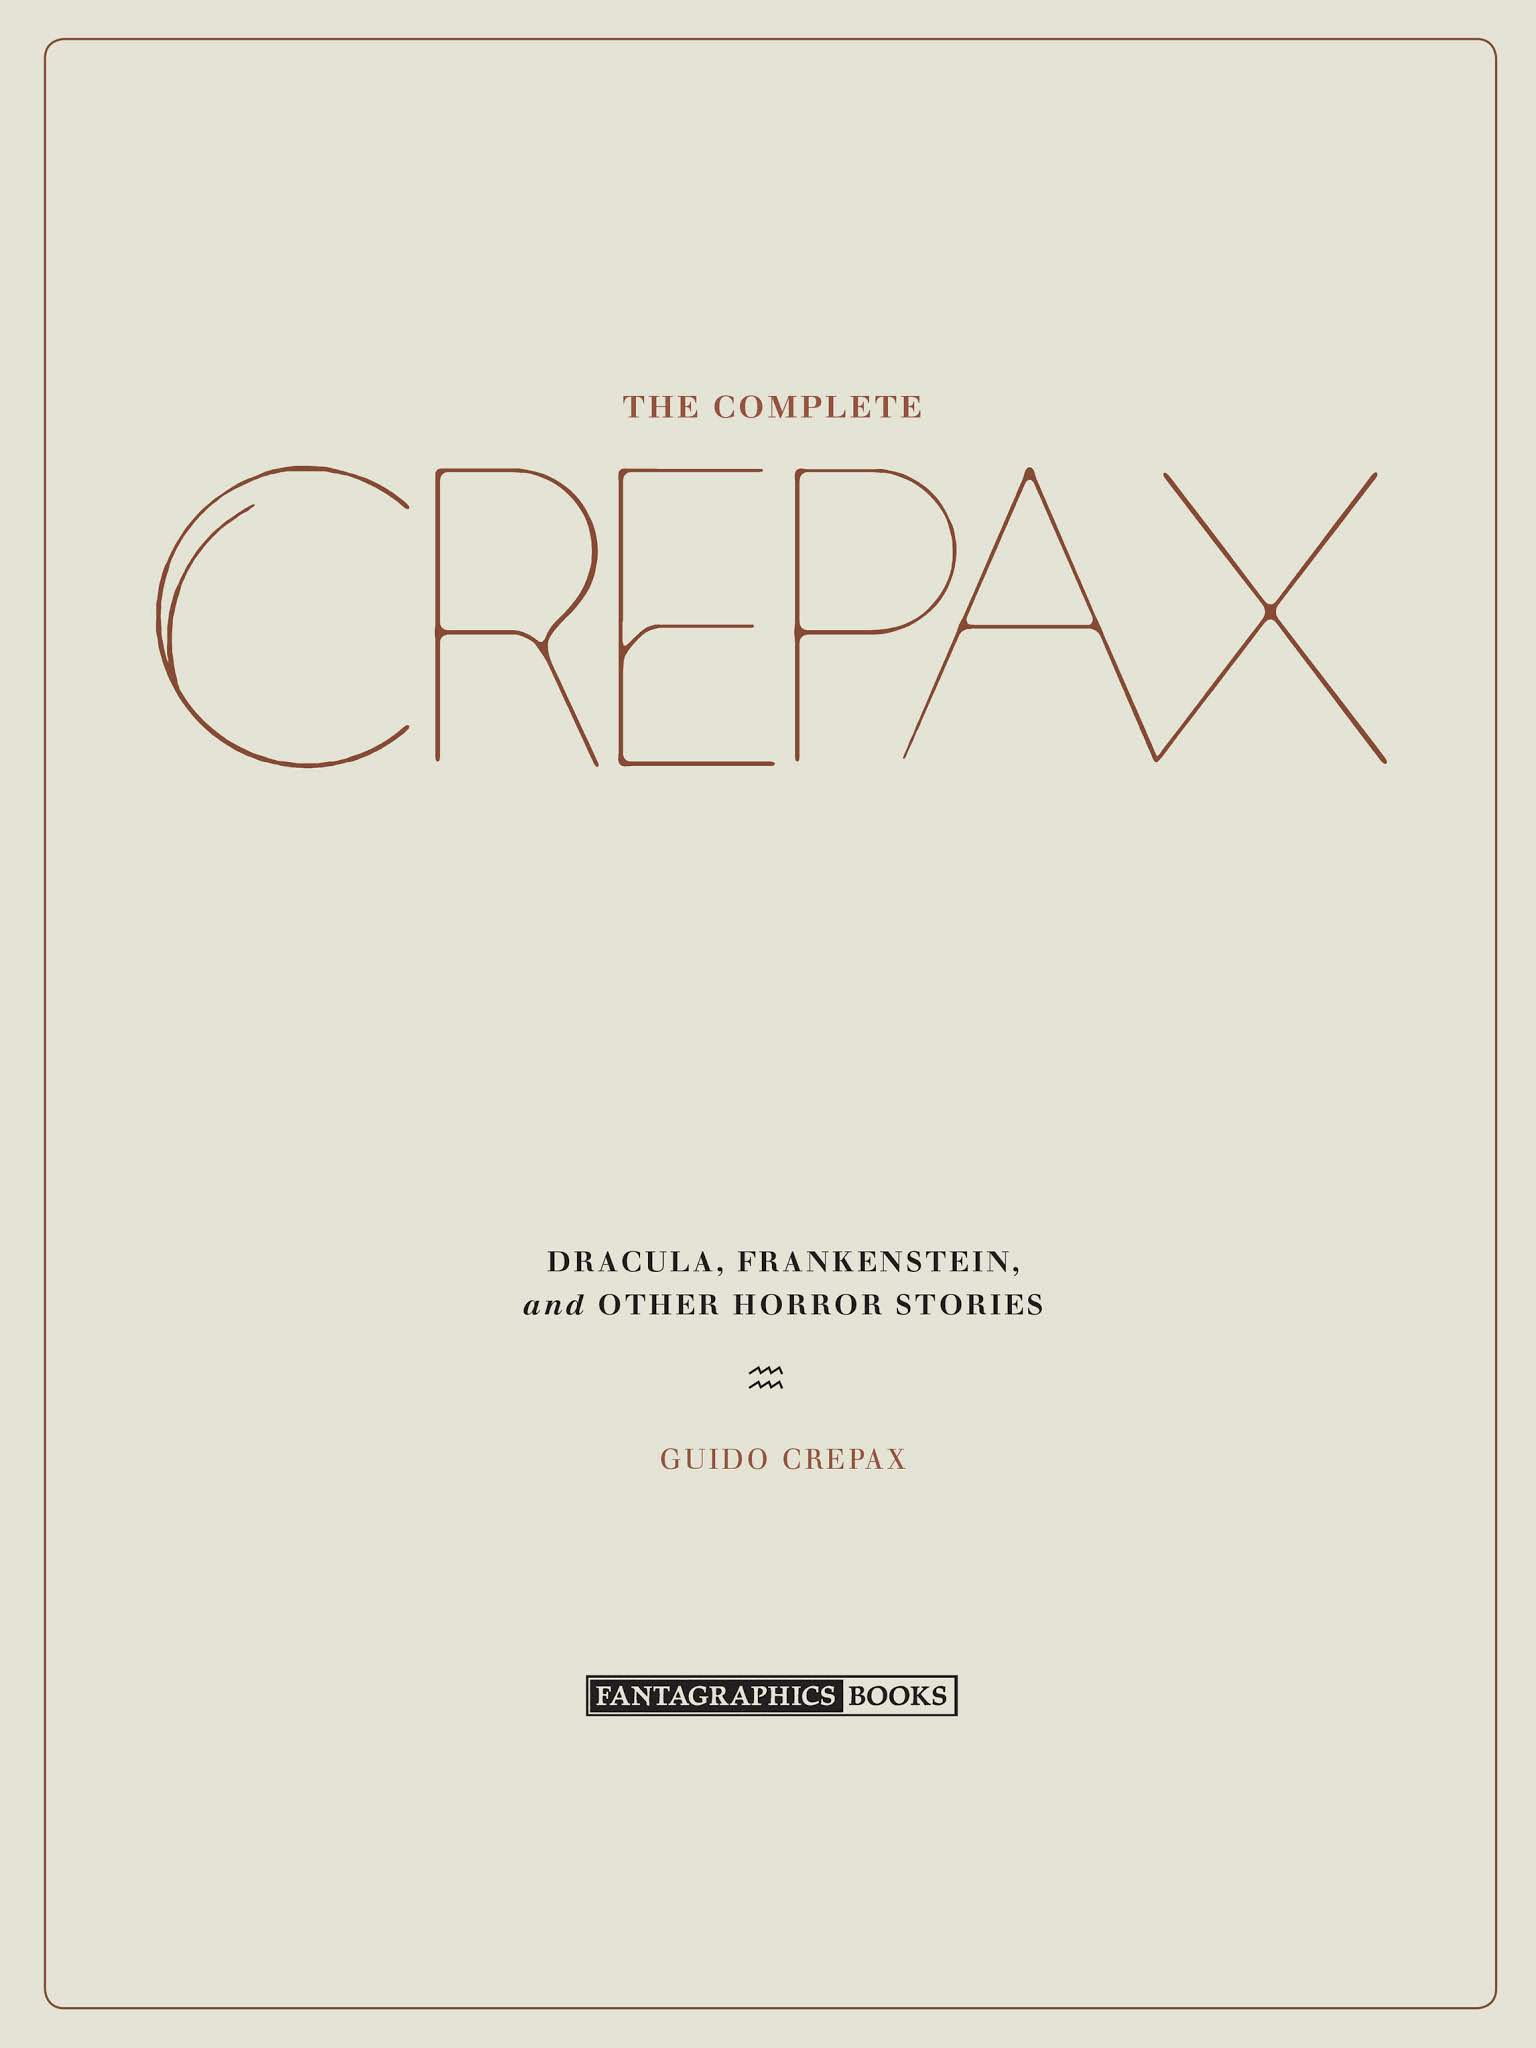 Read online The Complete Crepax comic -  Issue # TPB 1 - 4